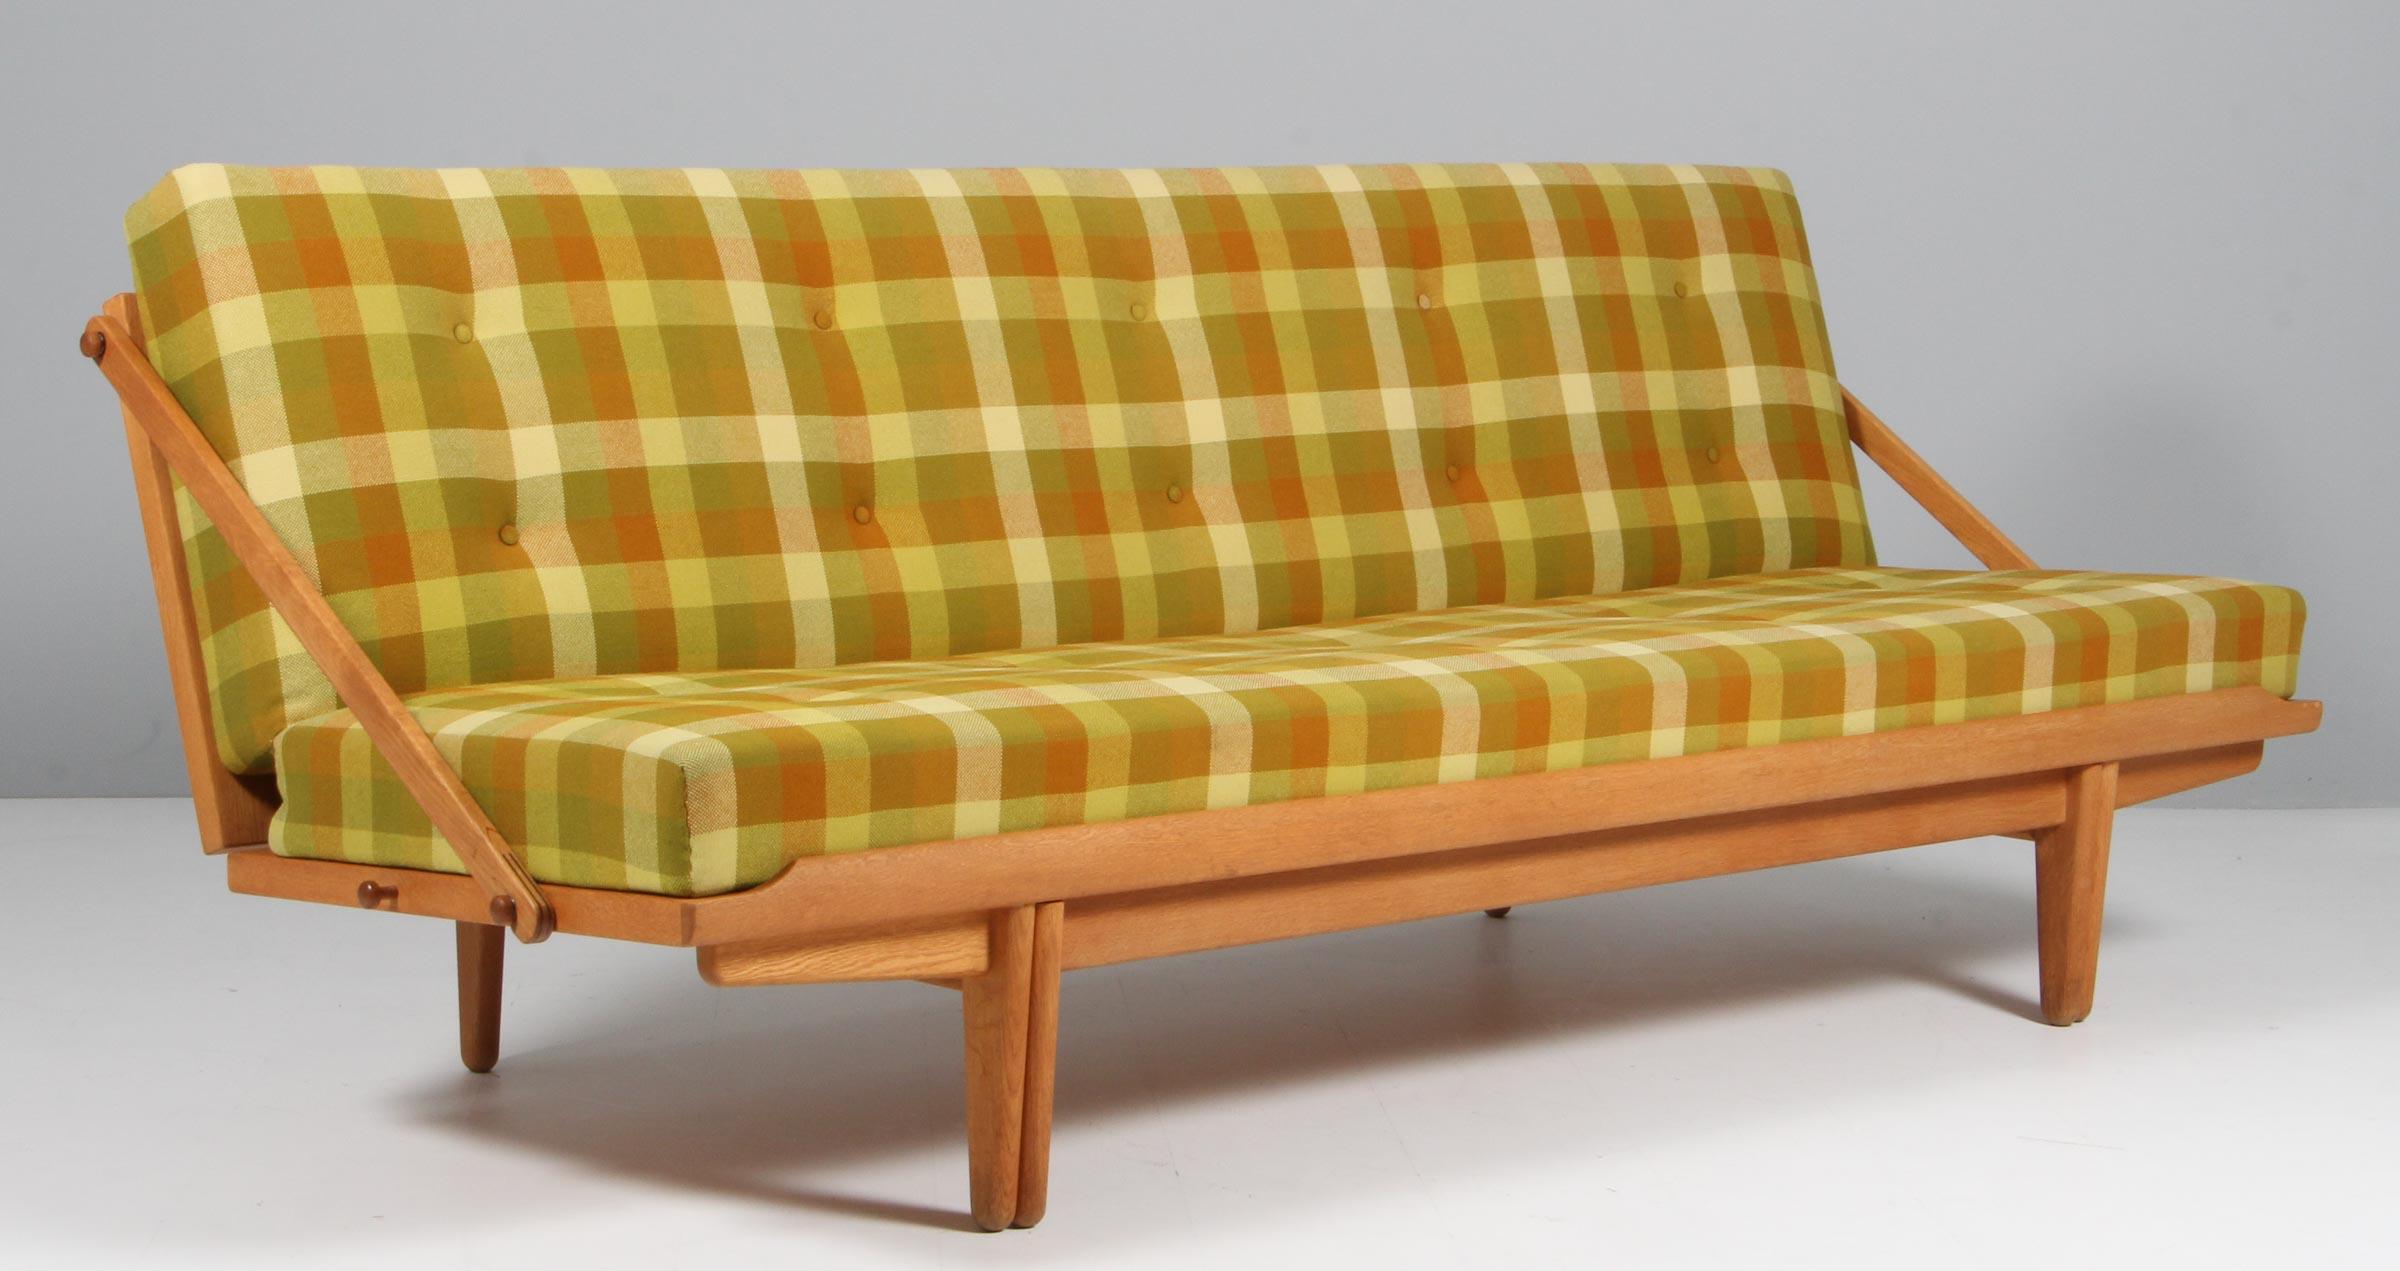 Danish Poul Volther Diva Daybed Sofa, Denmark, 1959